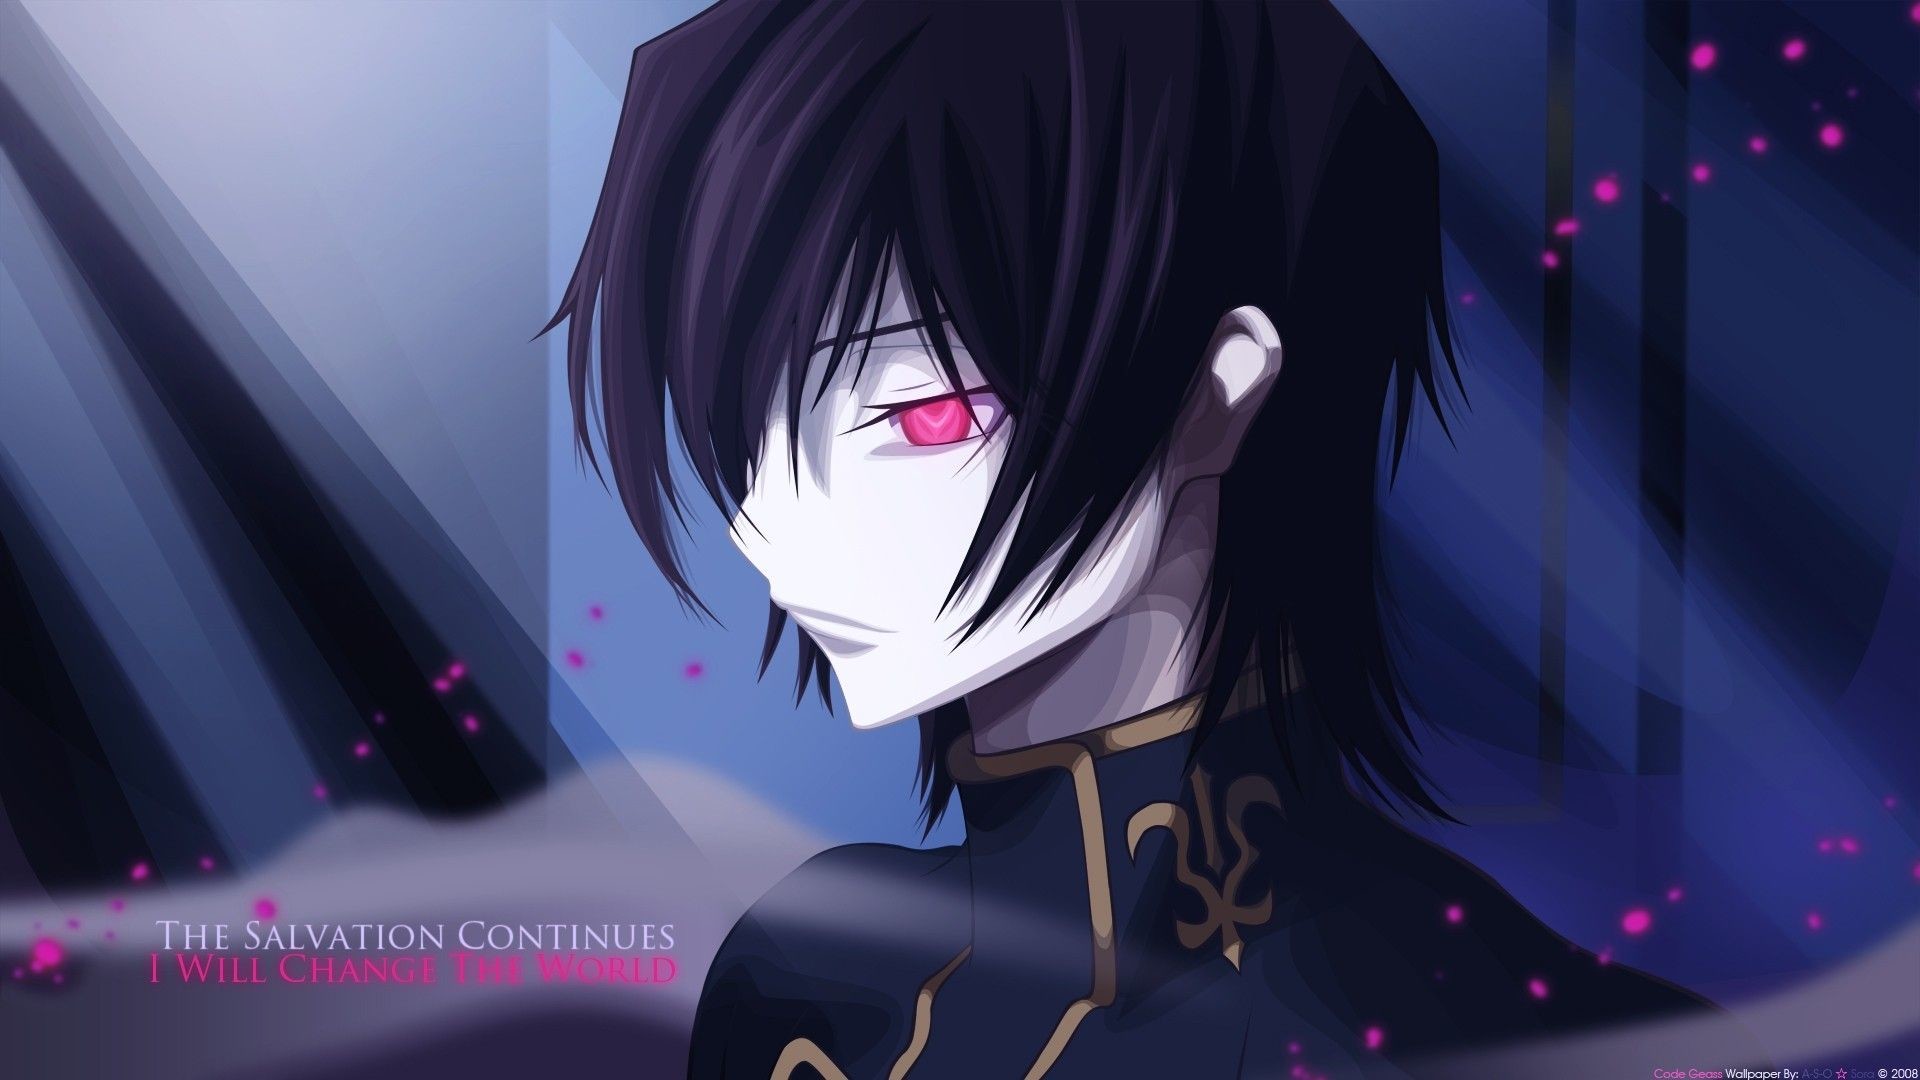 Anime Guy Wallpapers Adorable Wallpapers Anime Cool - Code Geass Lelouch Sad - HD Wallpaper 